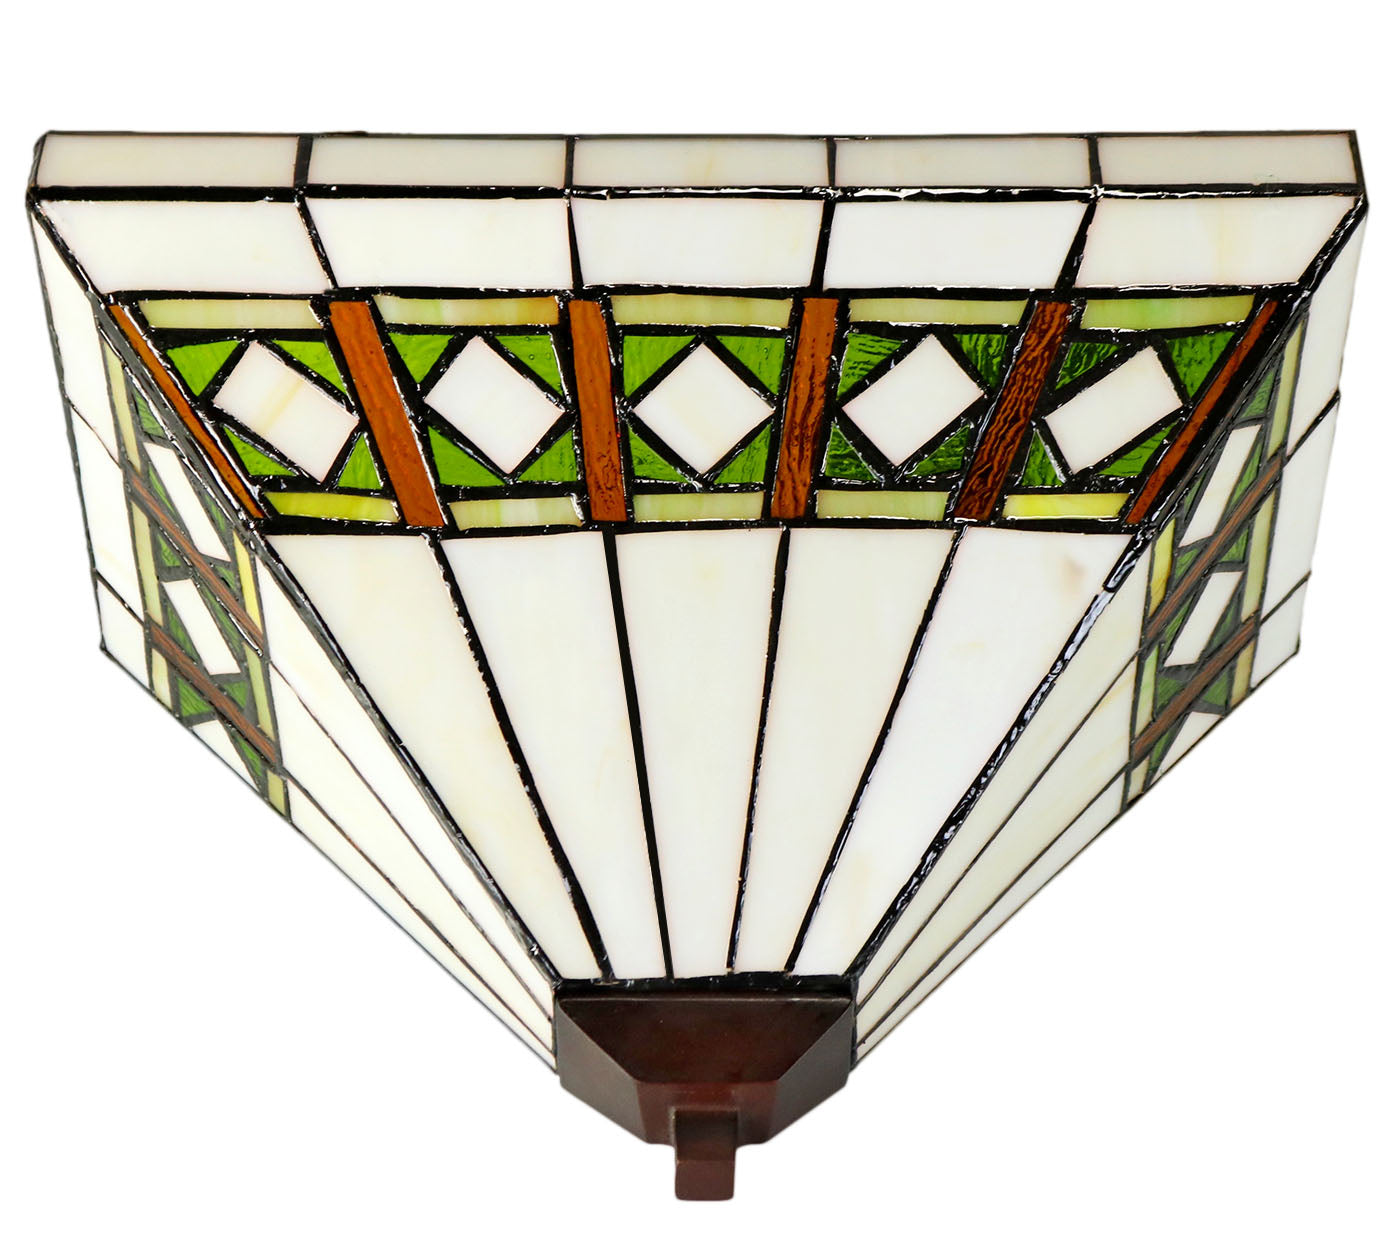 Classical Mission Stained Glass Tiffany Wall Light Wall Sconce